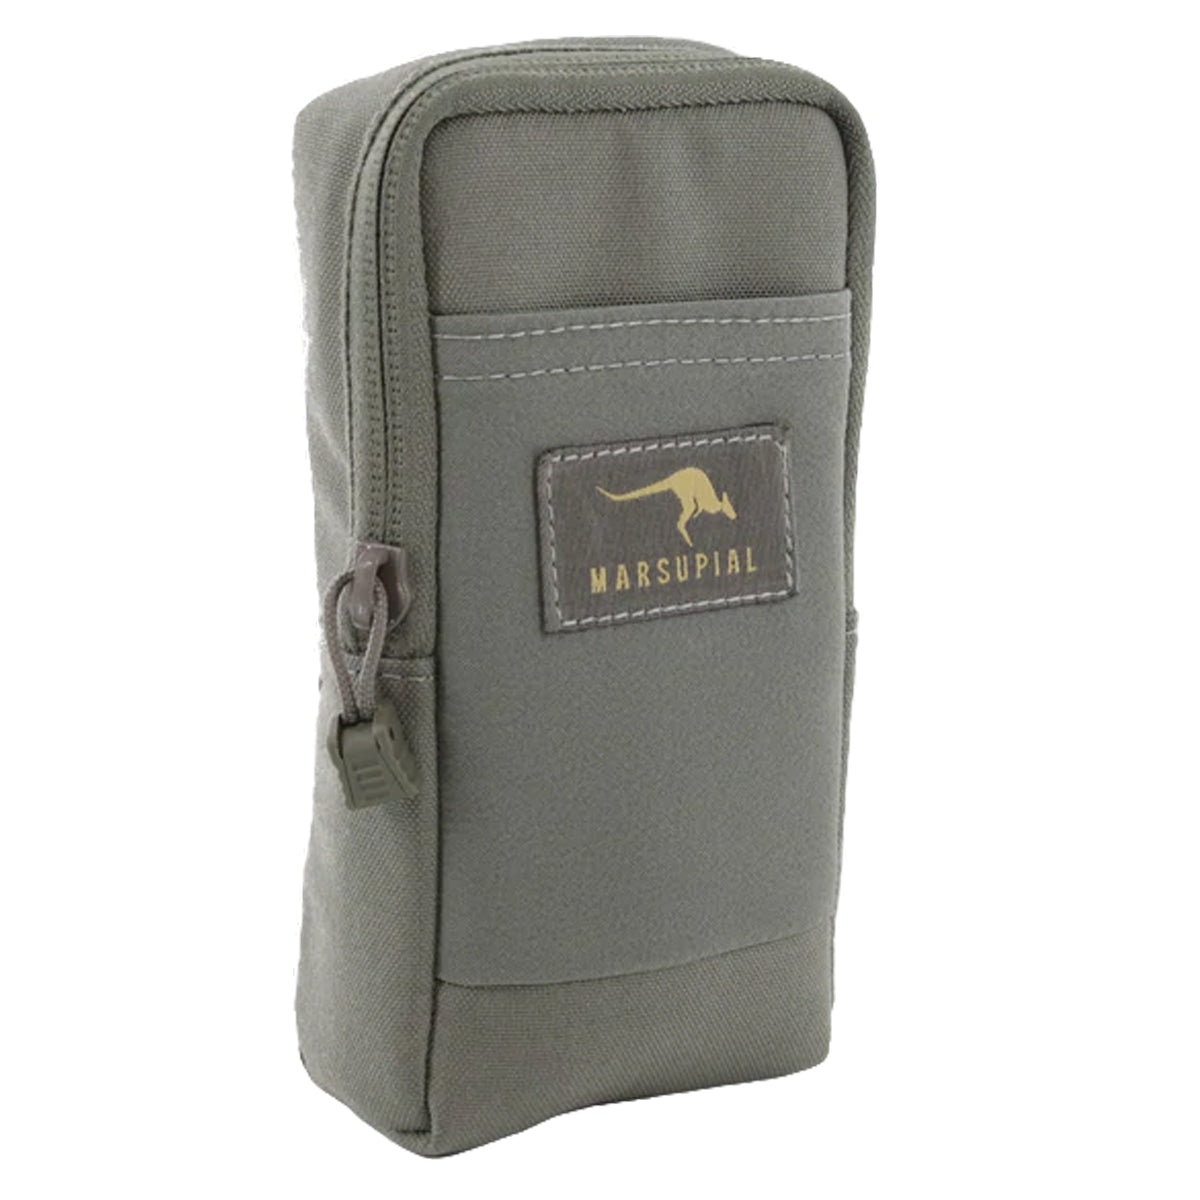 Marsupial Gear Zippered Pouch in  by GOHUNT | Marsupial Gear - GOHUNT Shop